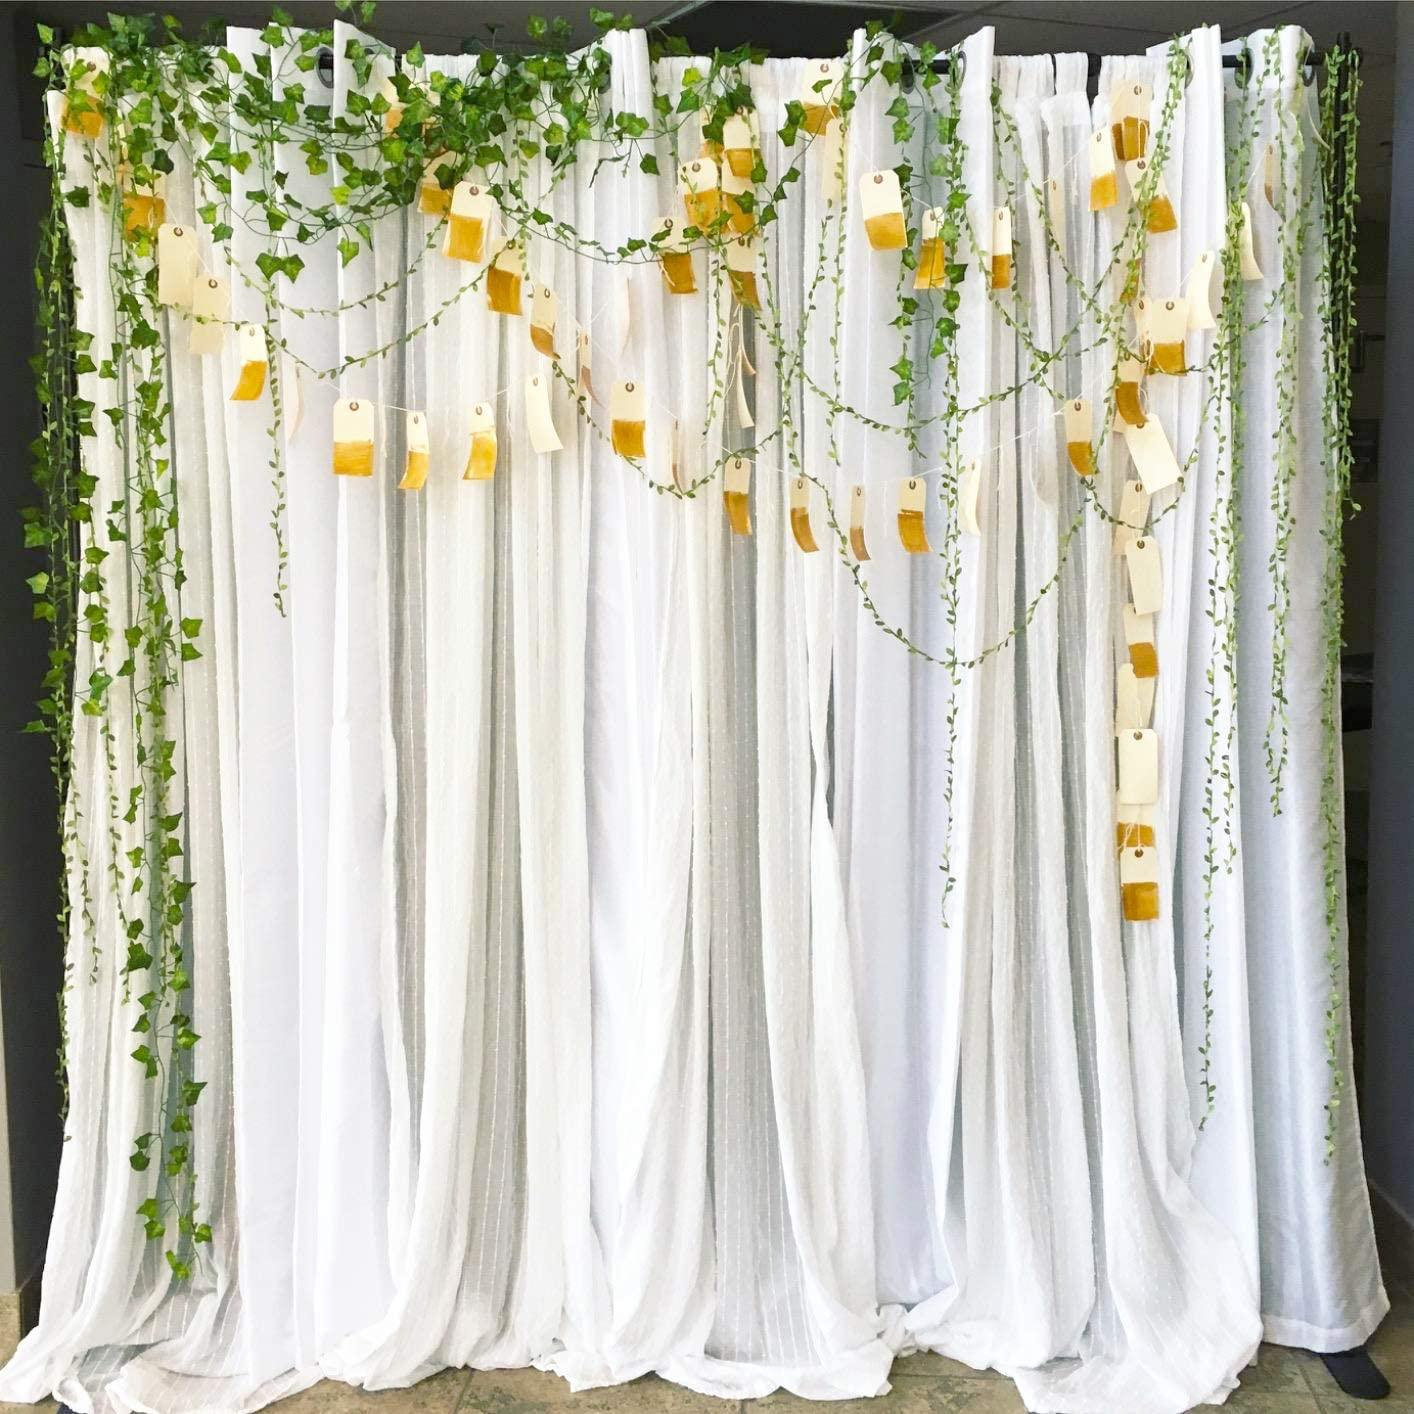 Artificial Vine Fake Leaves 265 Feet Artificial Leaf Garlands Fake Hanging Plants Fake Foliage Garland - If you say i do